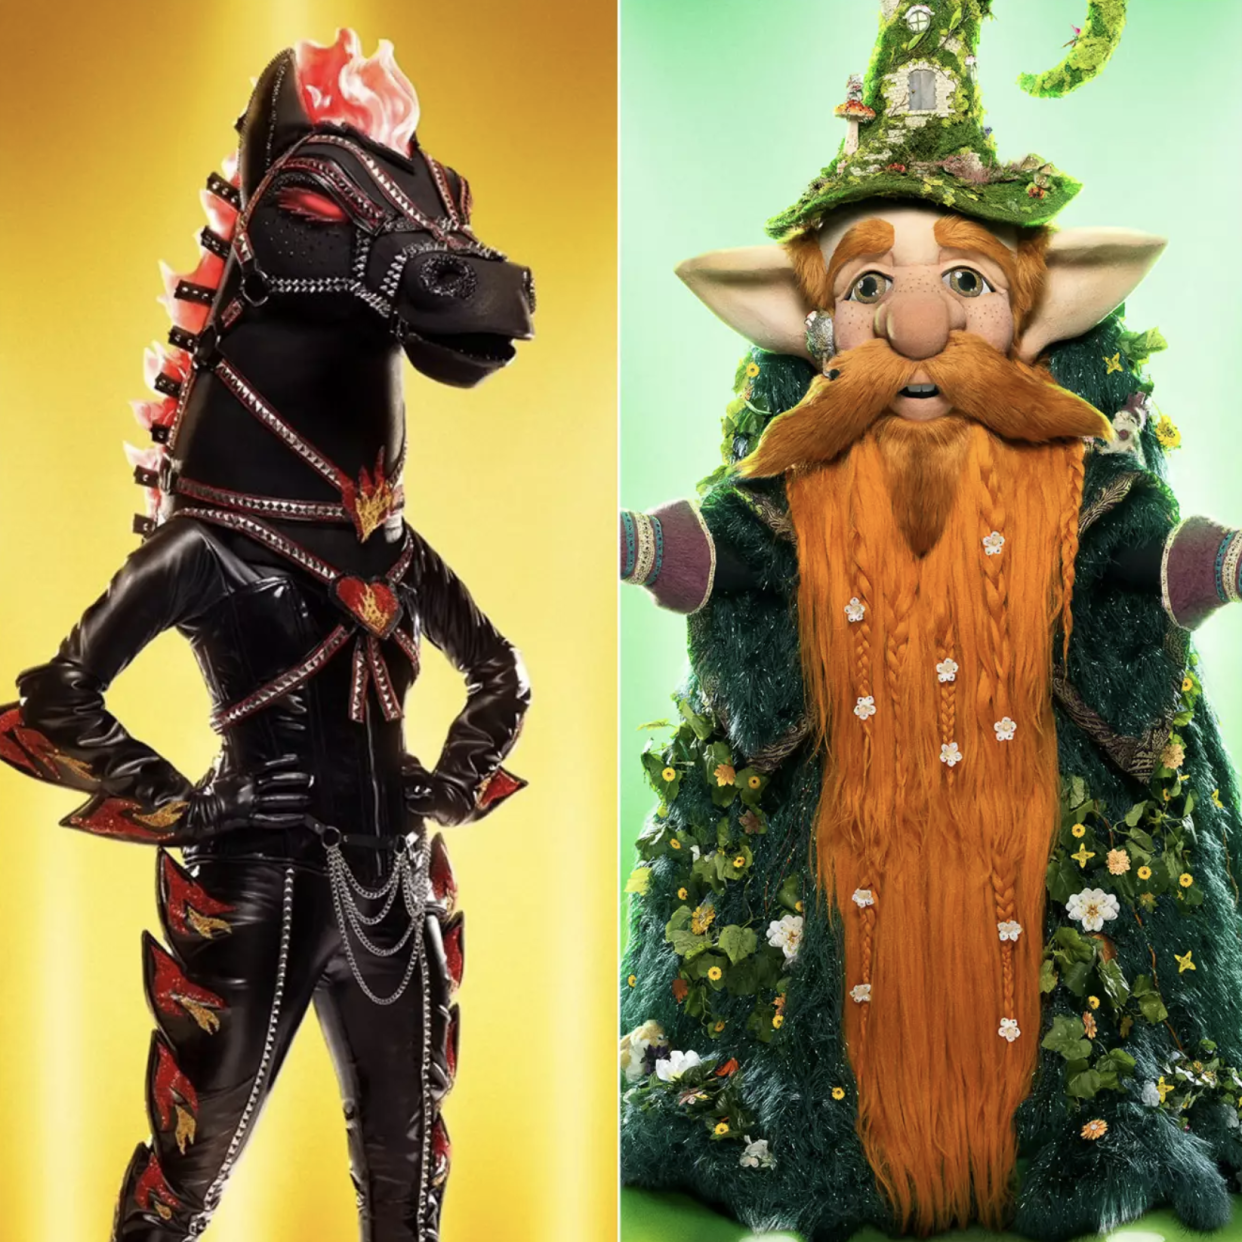 The Mustang and Gnome go home on 'The Masked Singer.' (Photos: Fox)